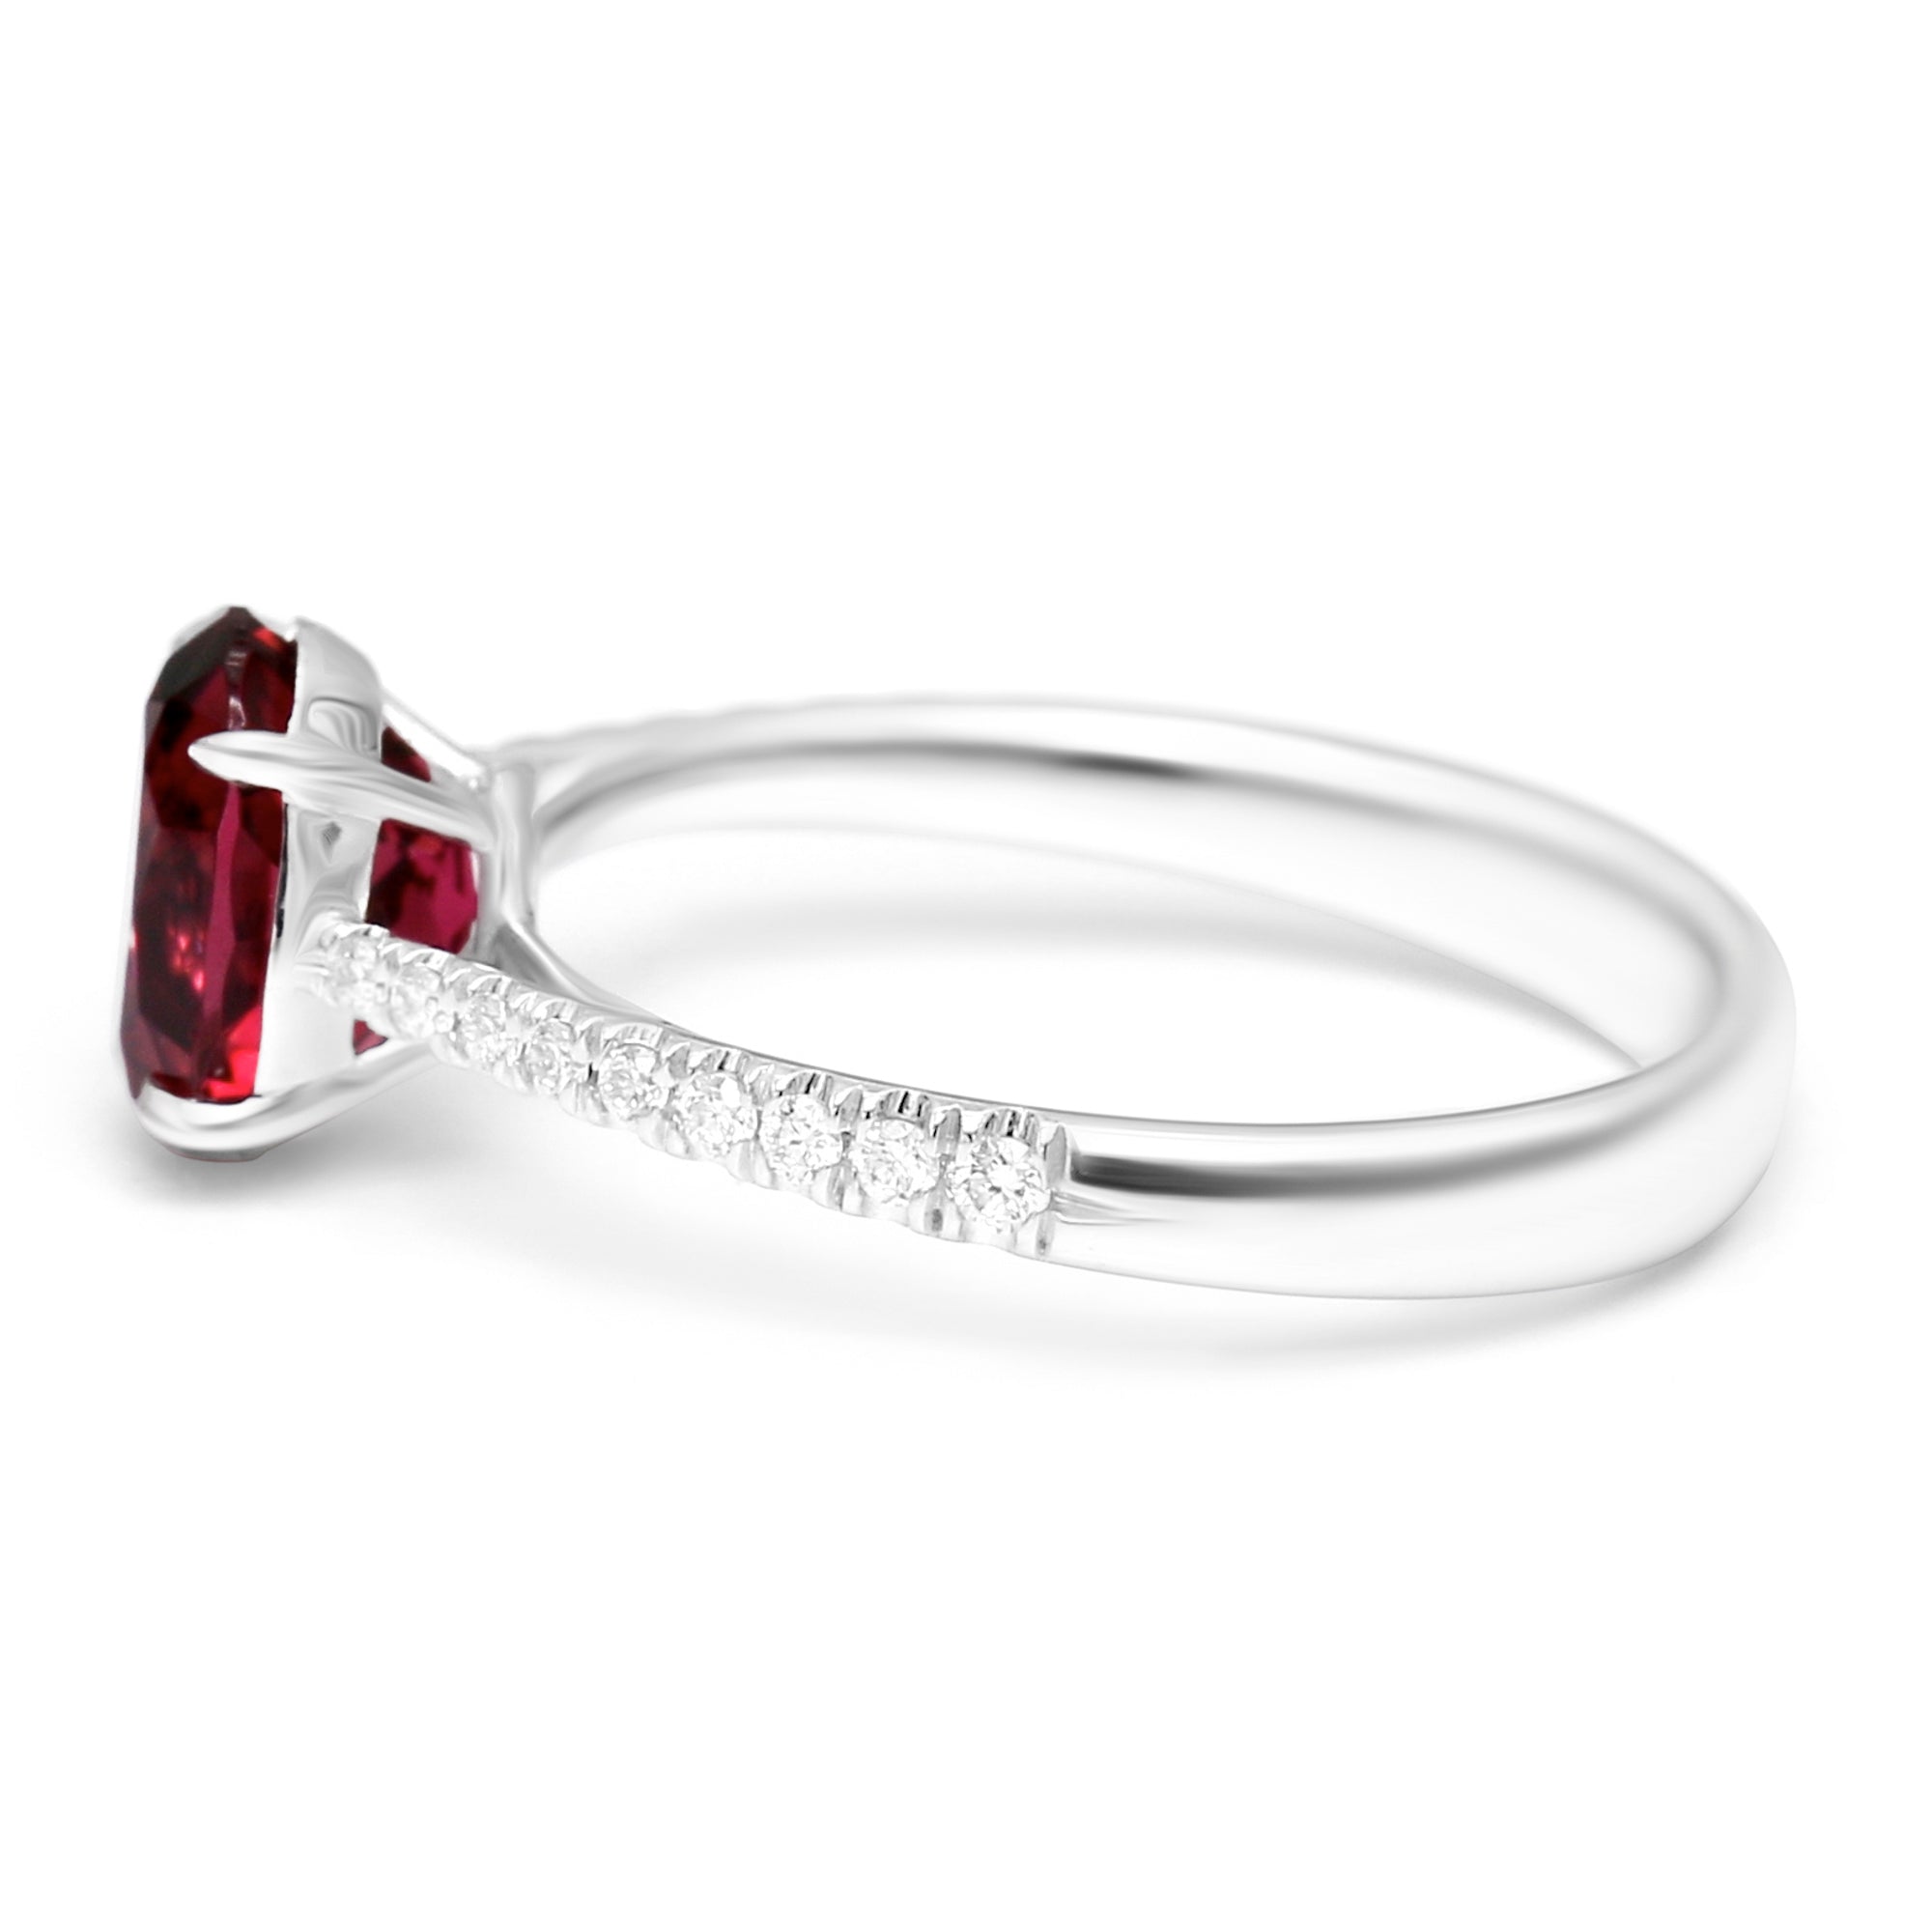 Rubellite Oval Ring with Diamonds - 1.79ct TW